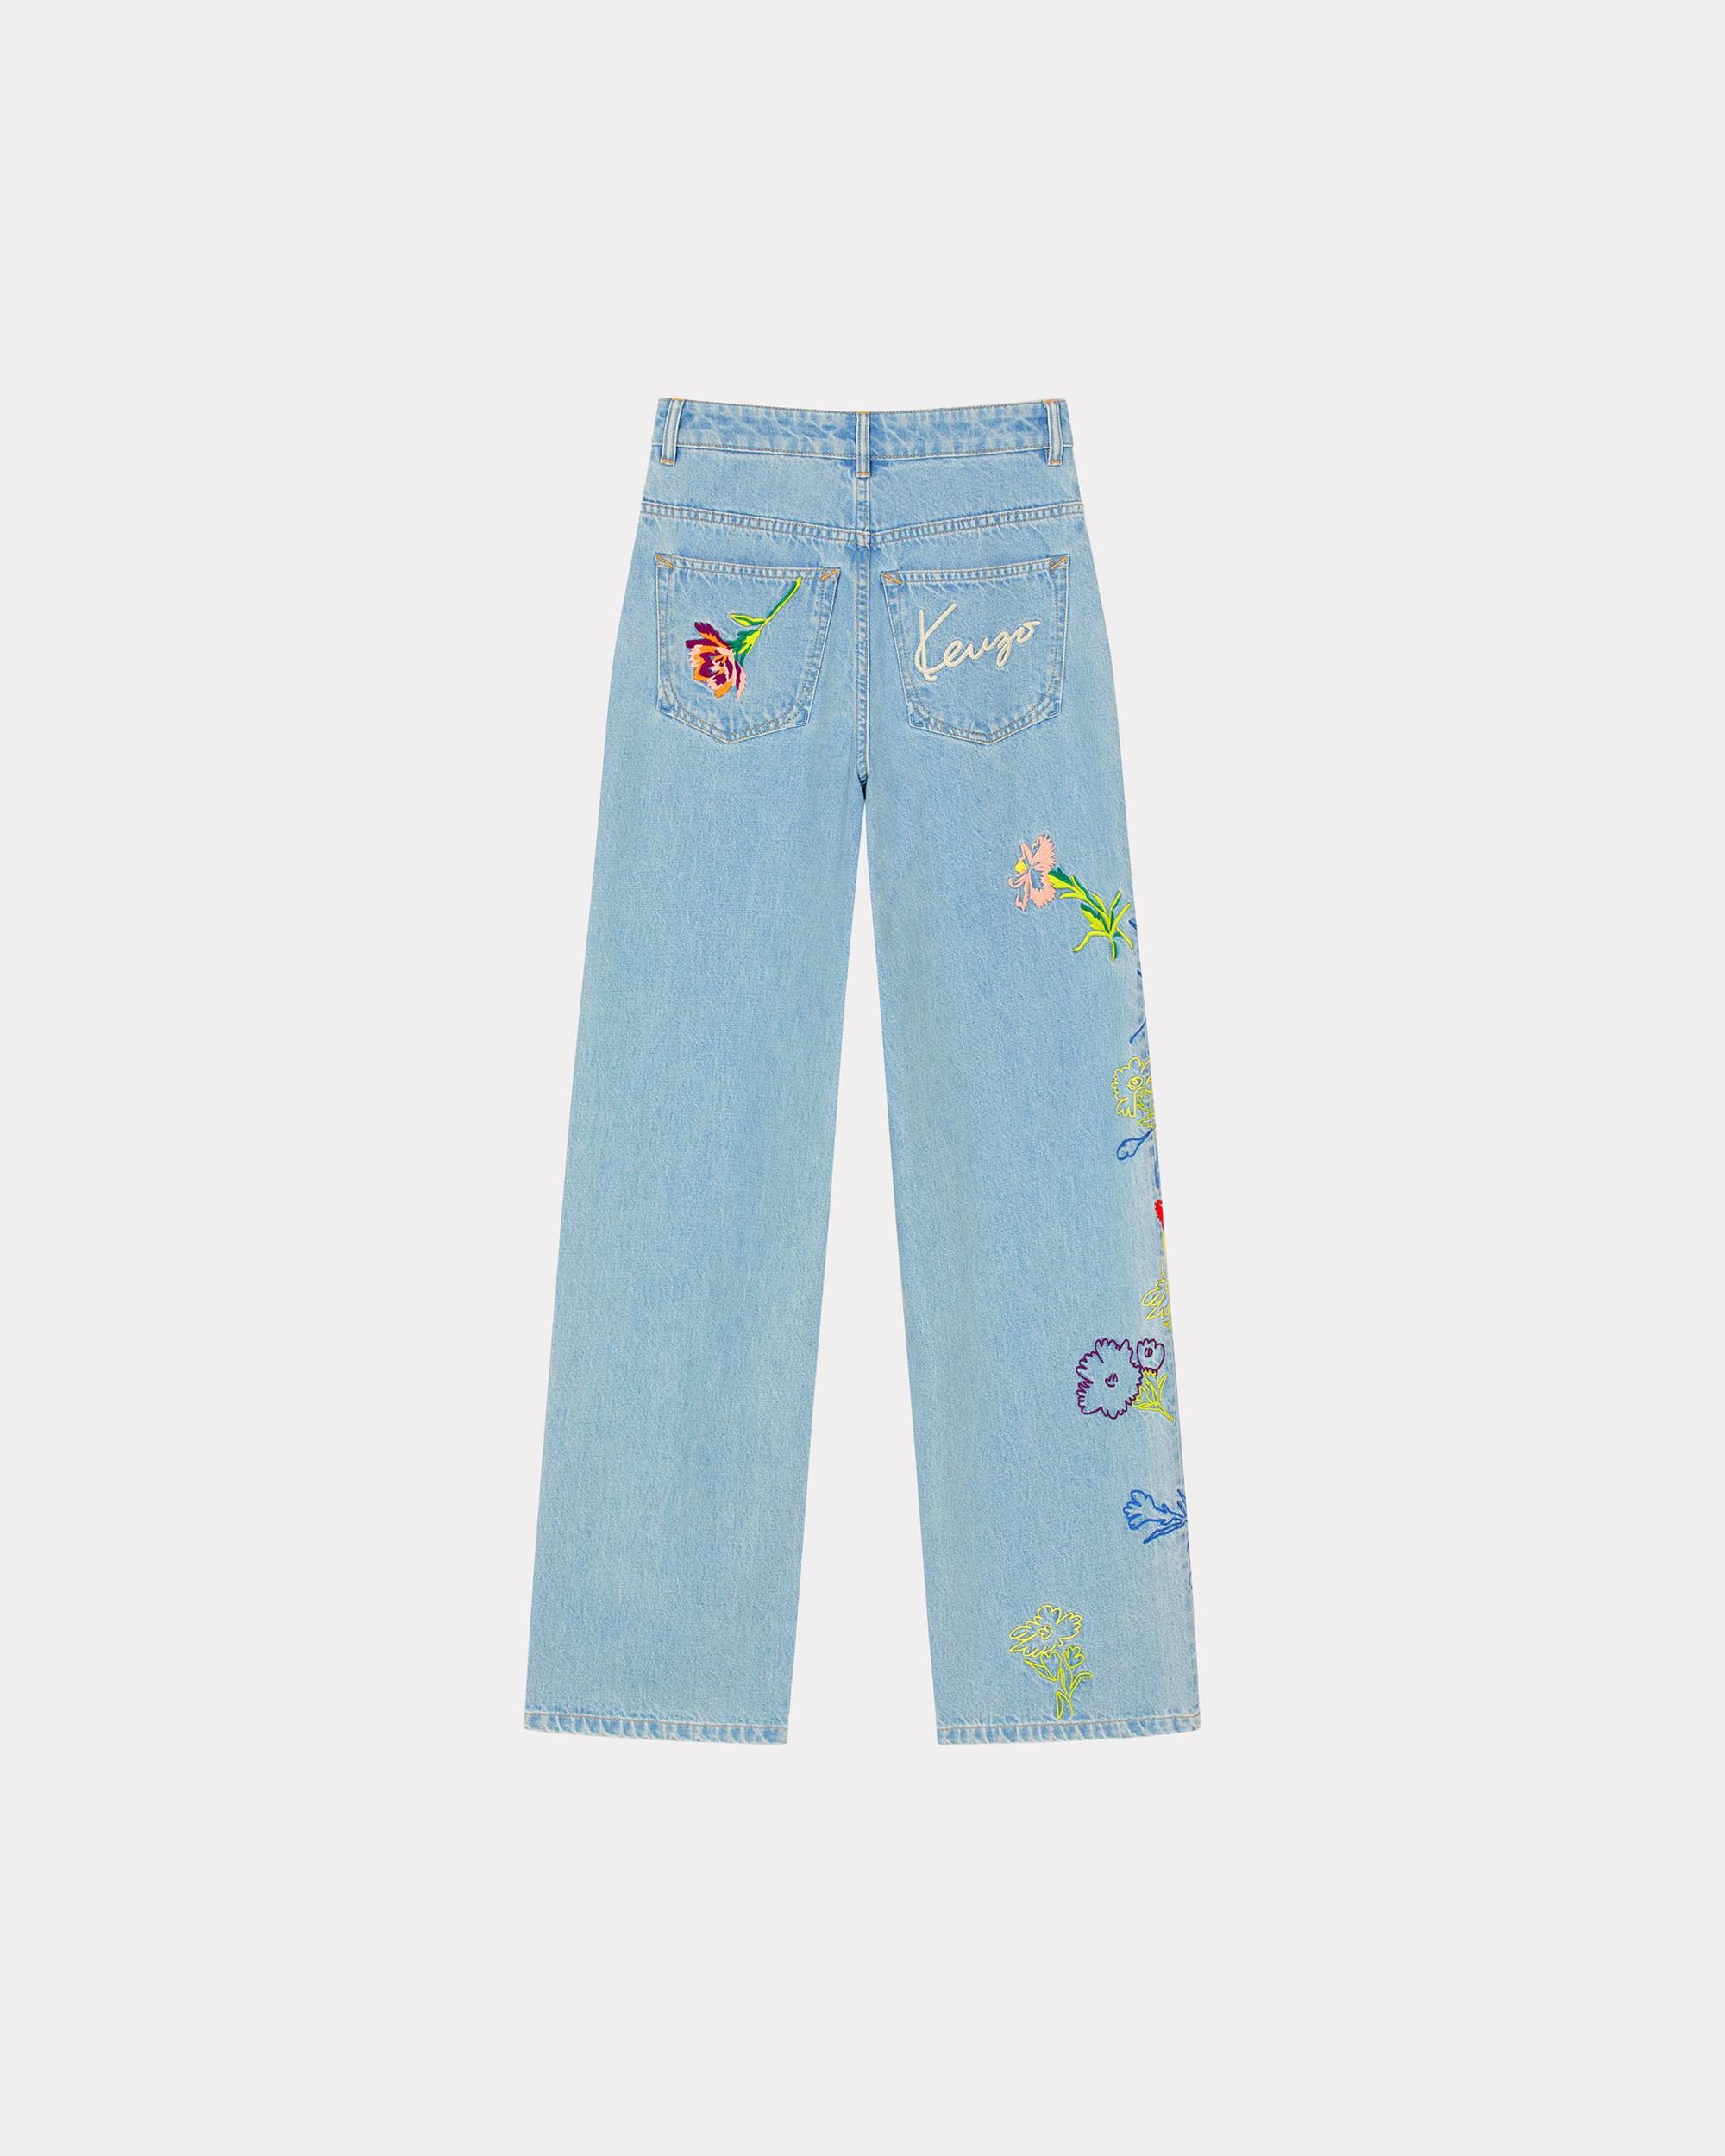 'KENZO Drawn Flowers' AYAME embroidered jeans - 2